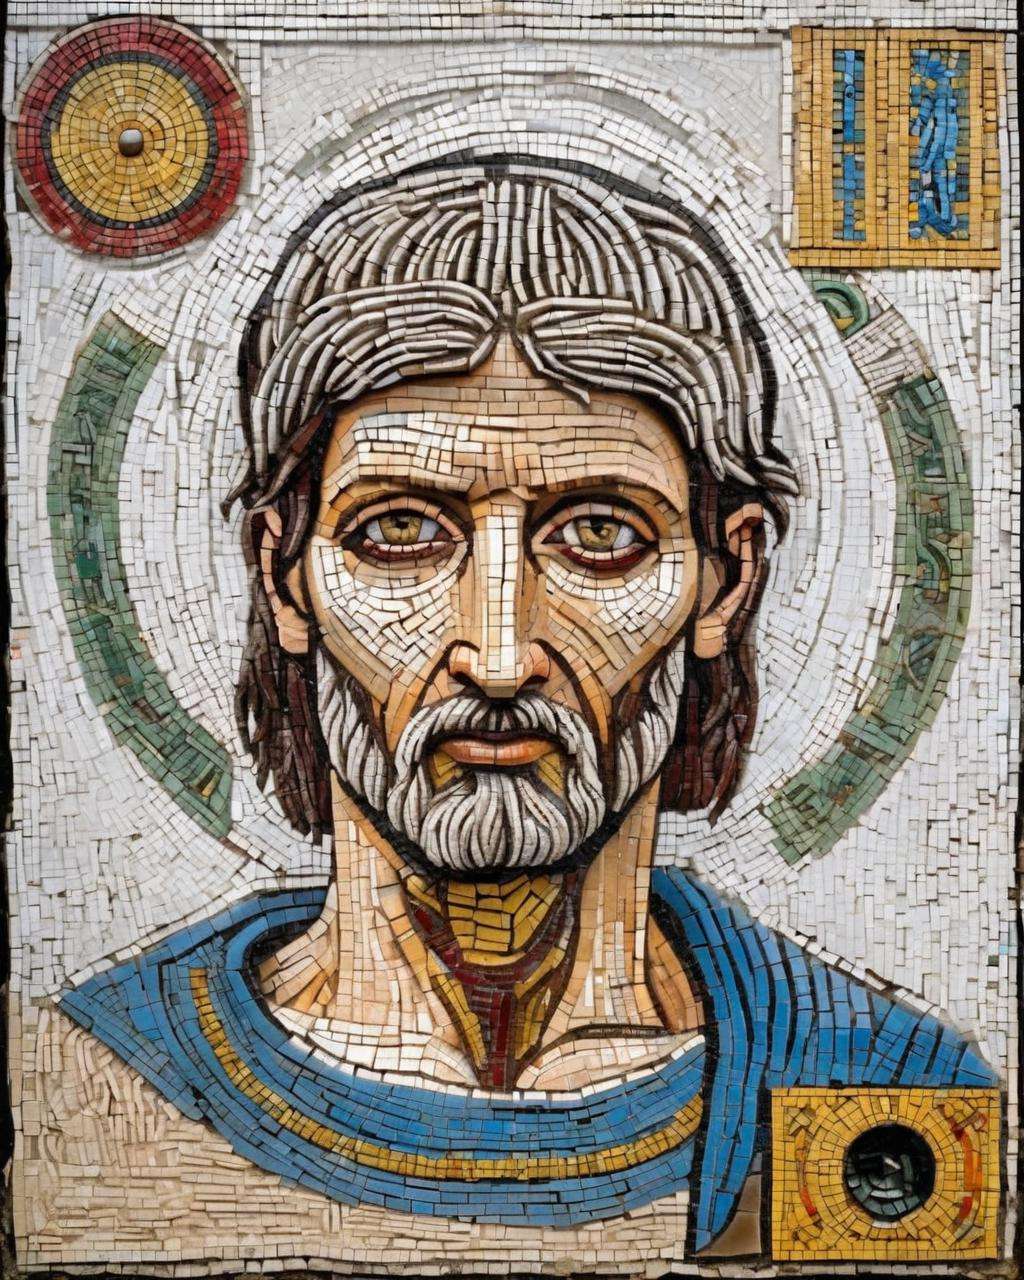 ancient roman mosaic :1.4, Peter de Sève , A mosaic of knowledge:1.0, adorned with symbols and text:0.7, pays homage to learning and wisdom:0.3 through visual storytelling. , cyberpunk:1.3<lora:mosaic:1.0>